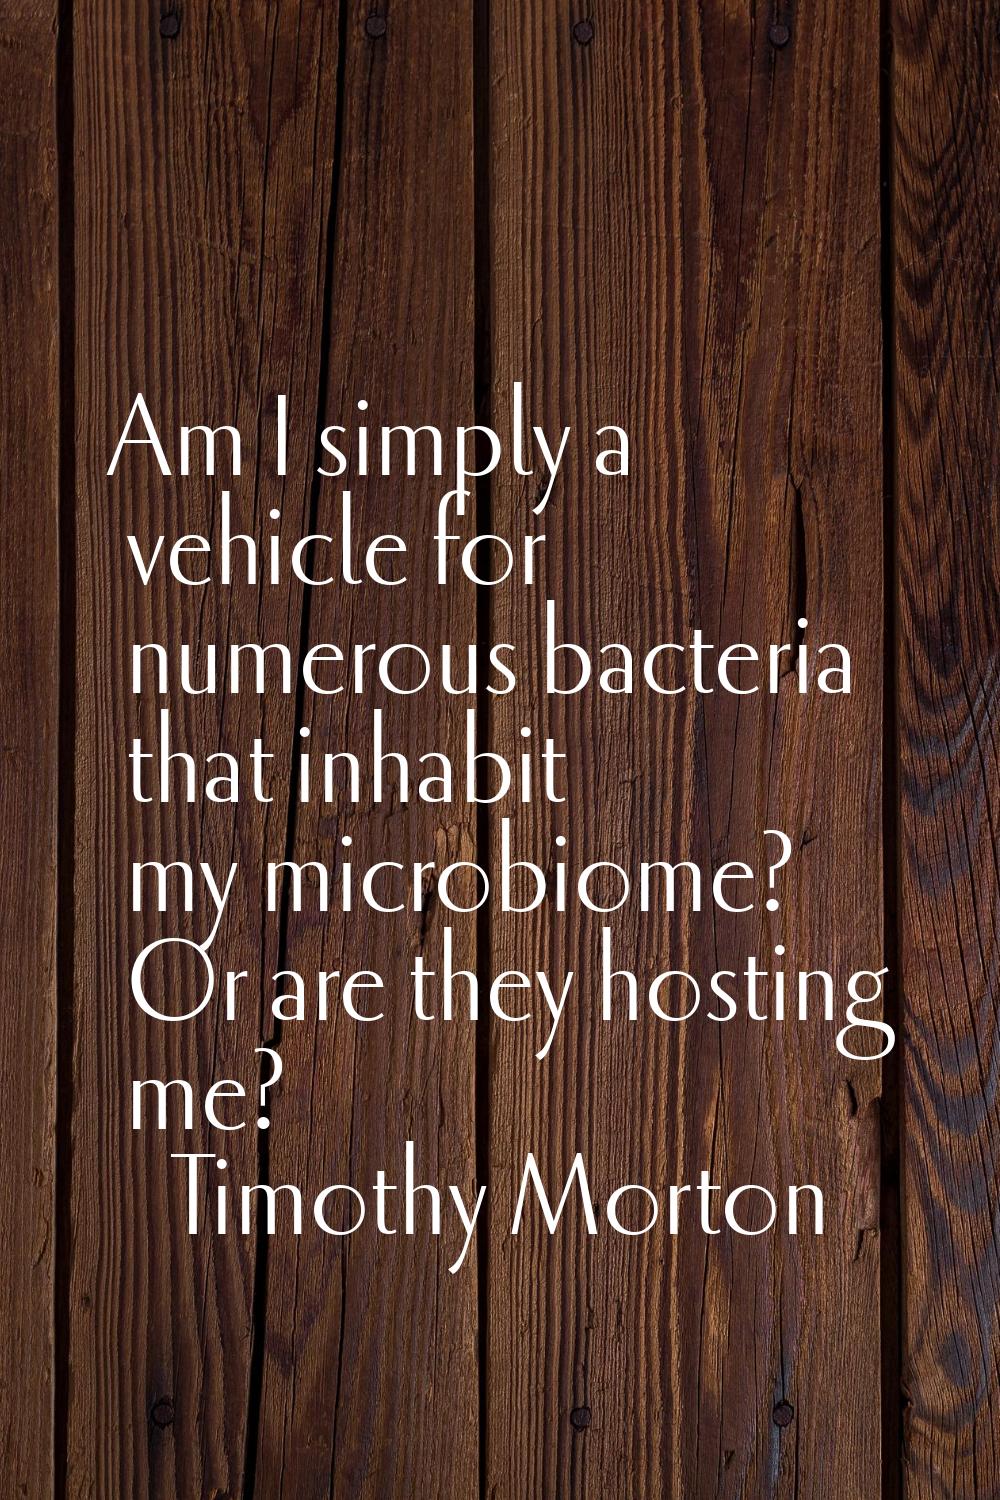 Am I simply a vehicle for numerous bacteria that inhabit my microbiome? Or are they hosting me?